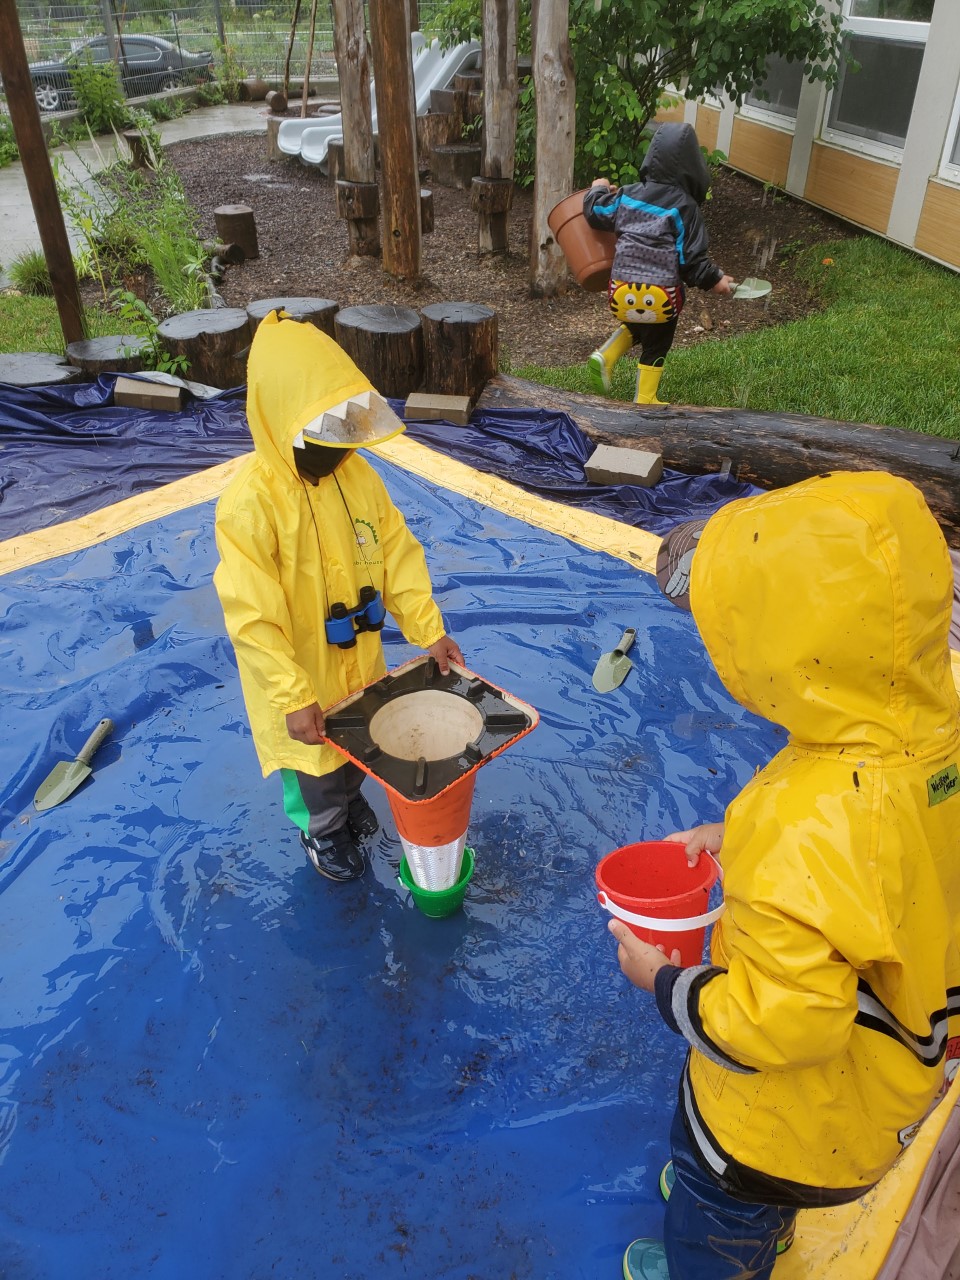 Two children in raincoats and boots play with an upside-down traffic cone outside and buckets